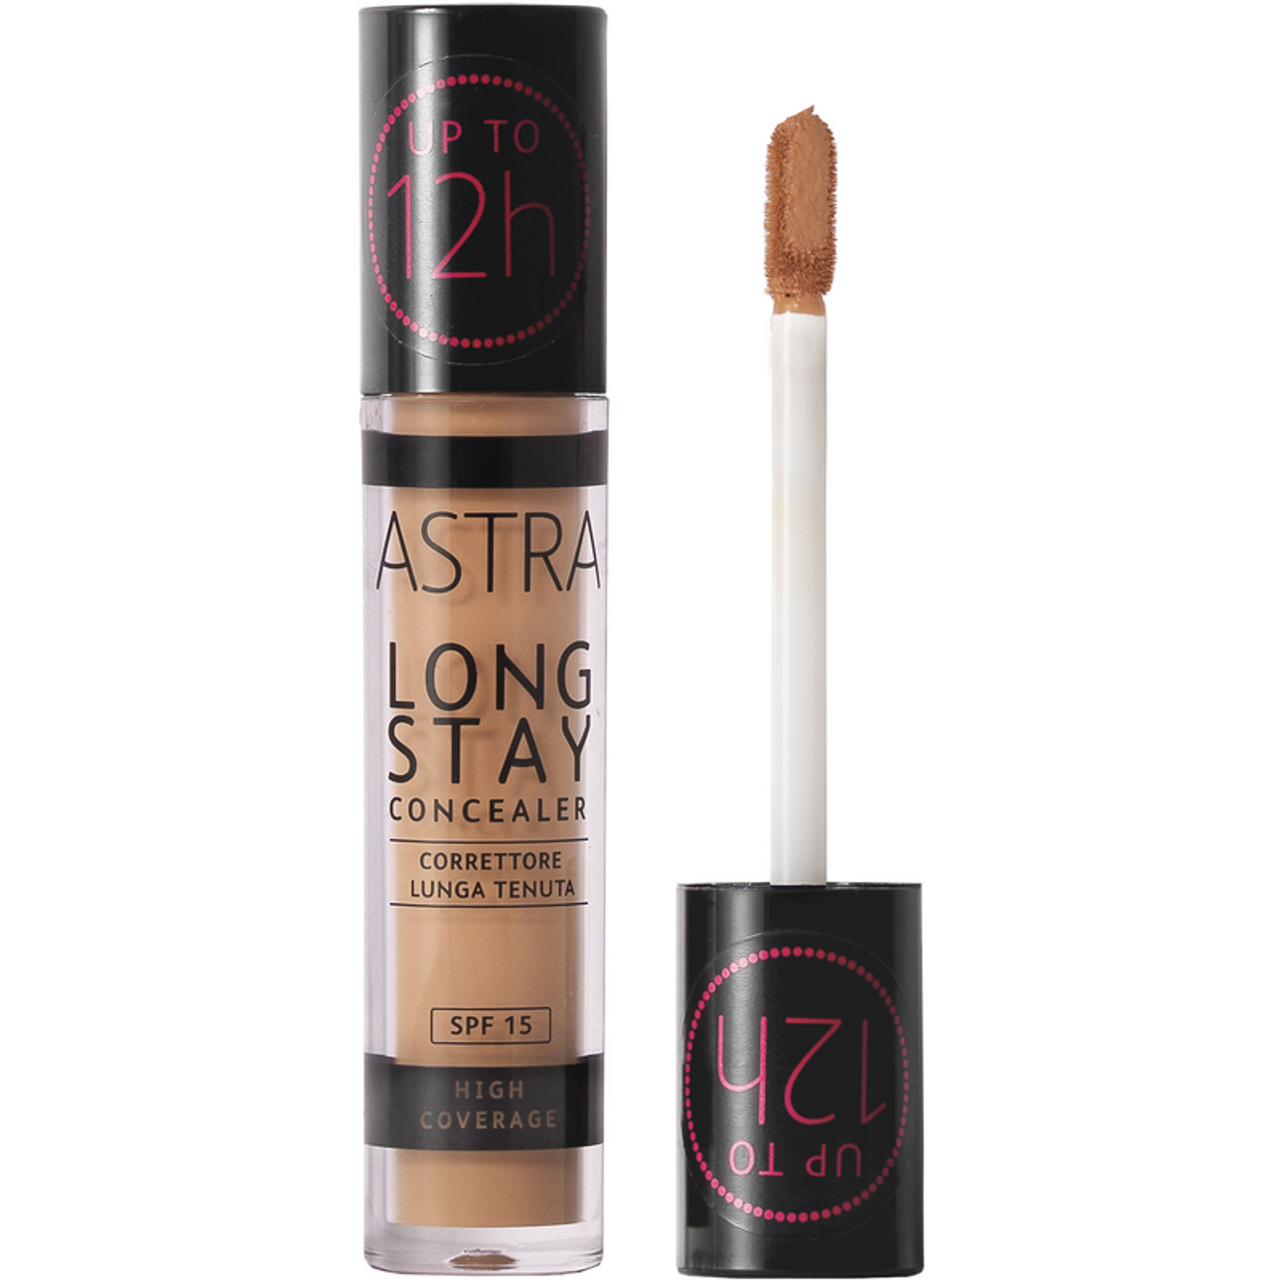 Image of Astra Long stay concealer - Correttore a lunga tenuta - 07W